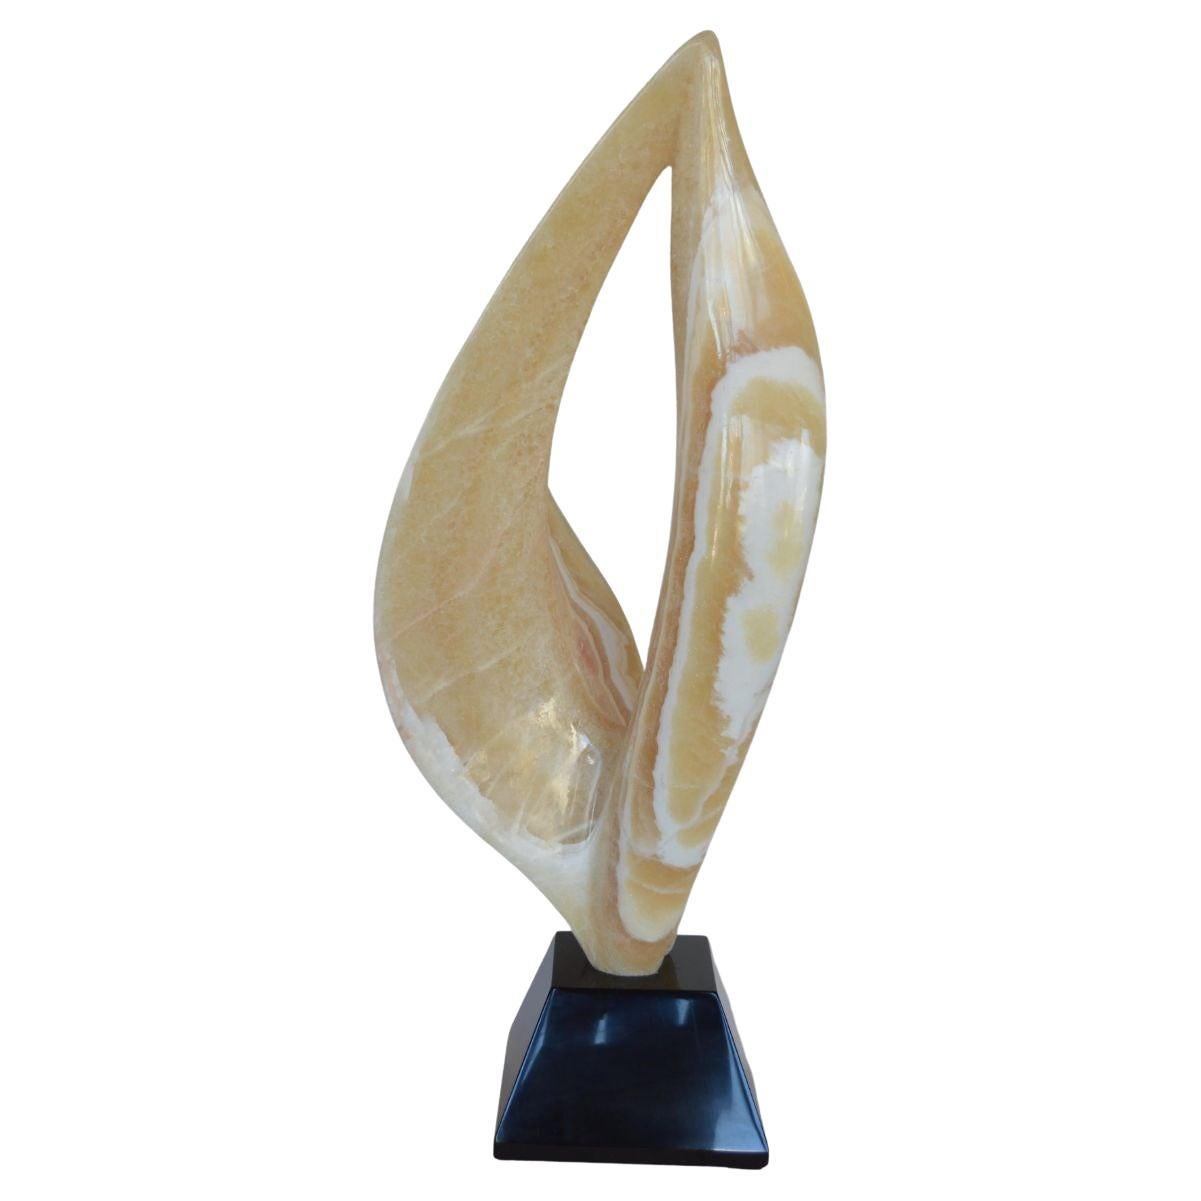 Onyx Flame Sculpture